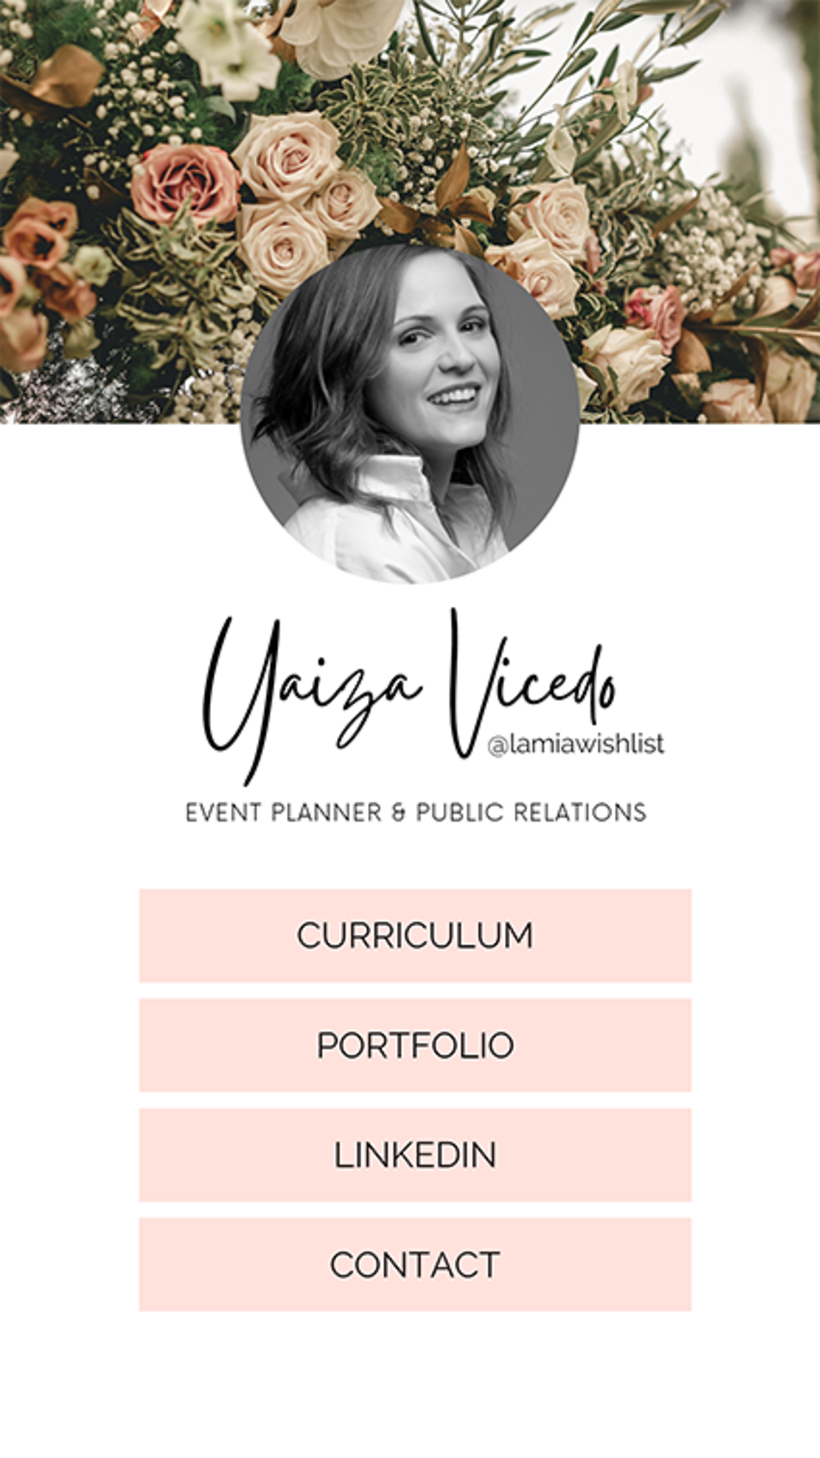 Online Course - Instagram Feed Design with Canva (Isabel Gil Loef